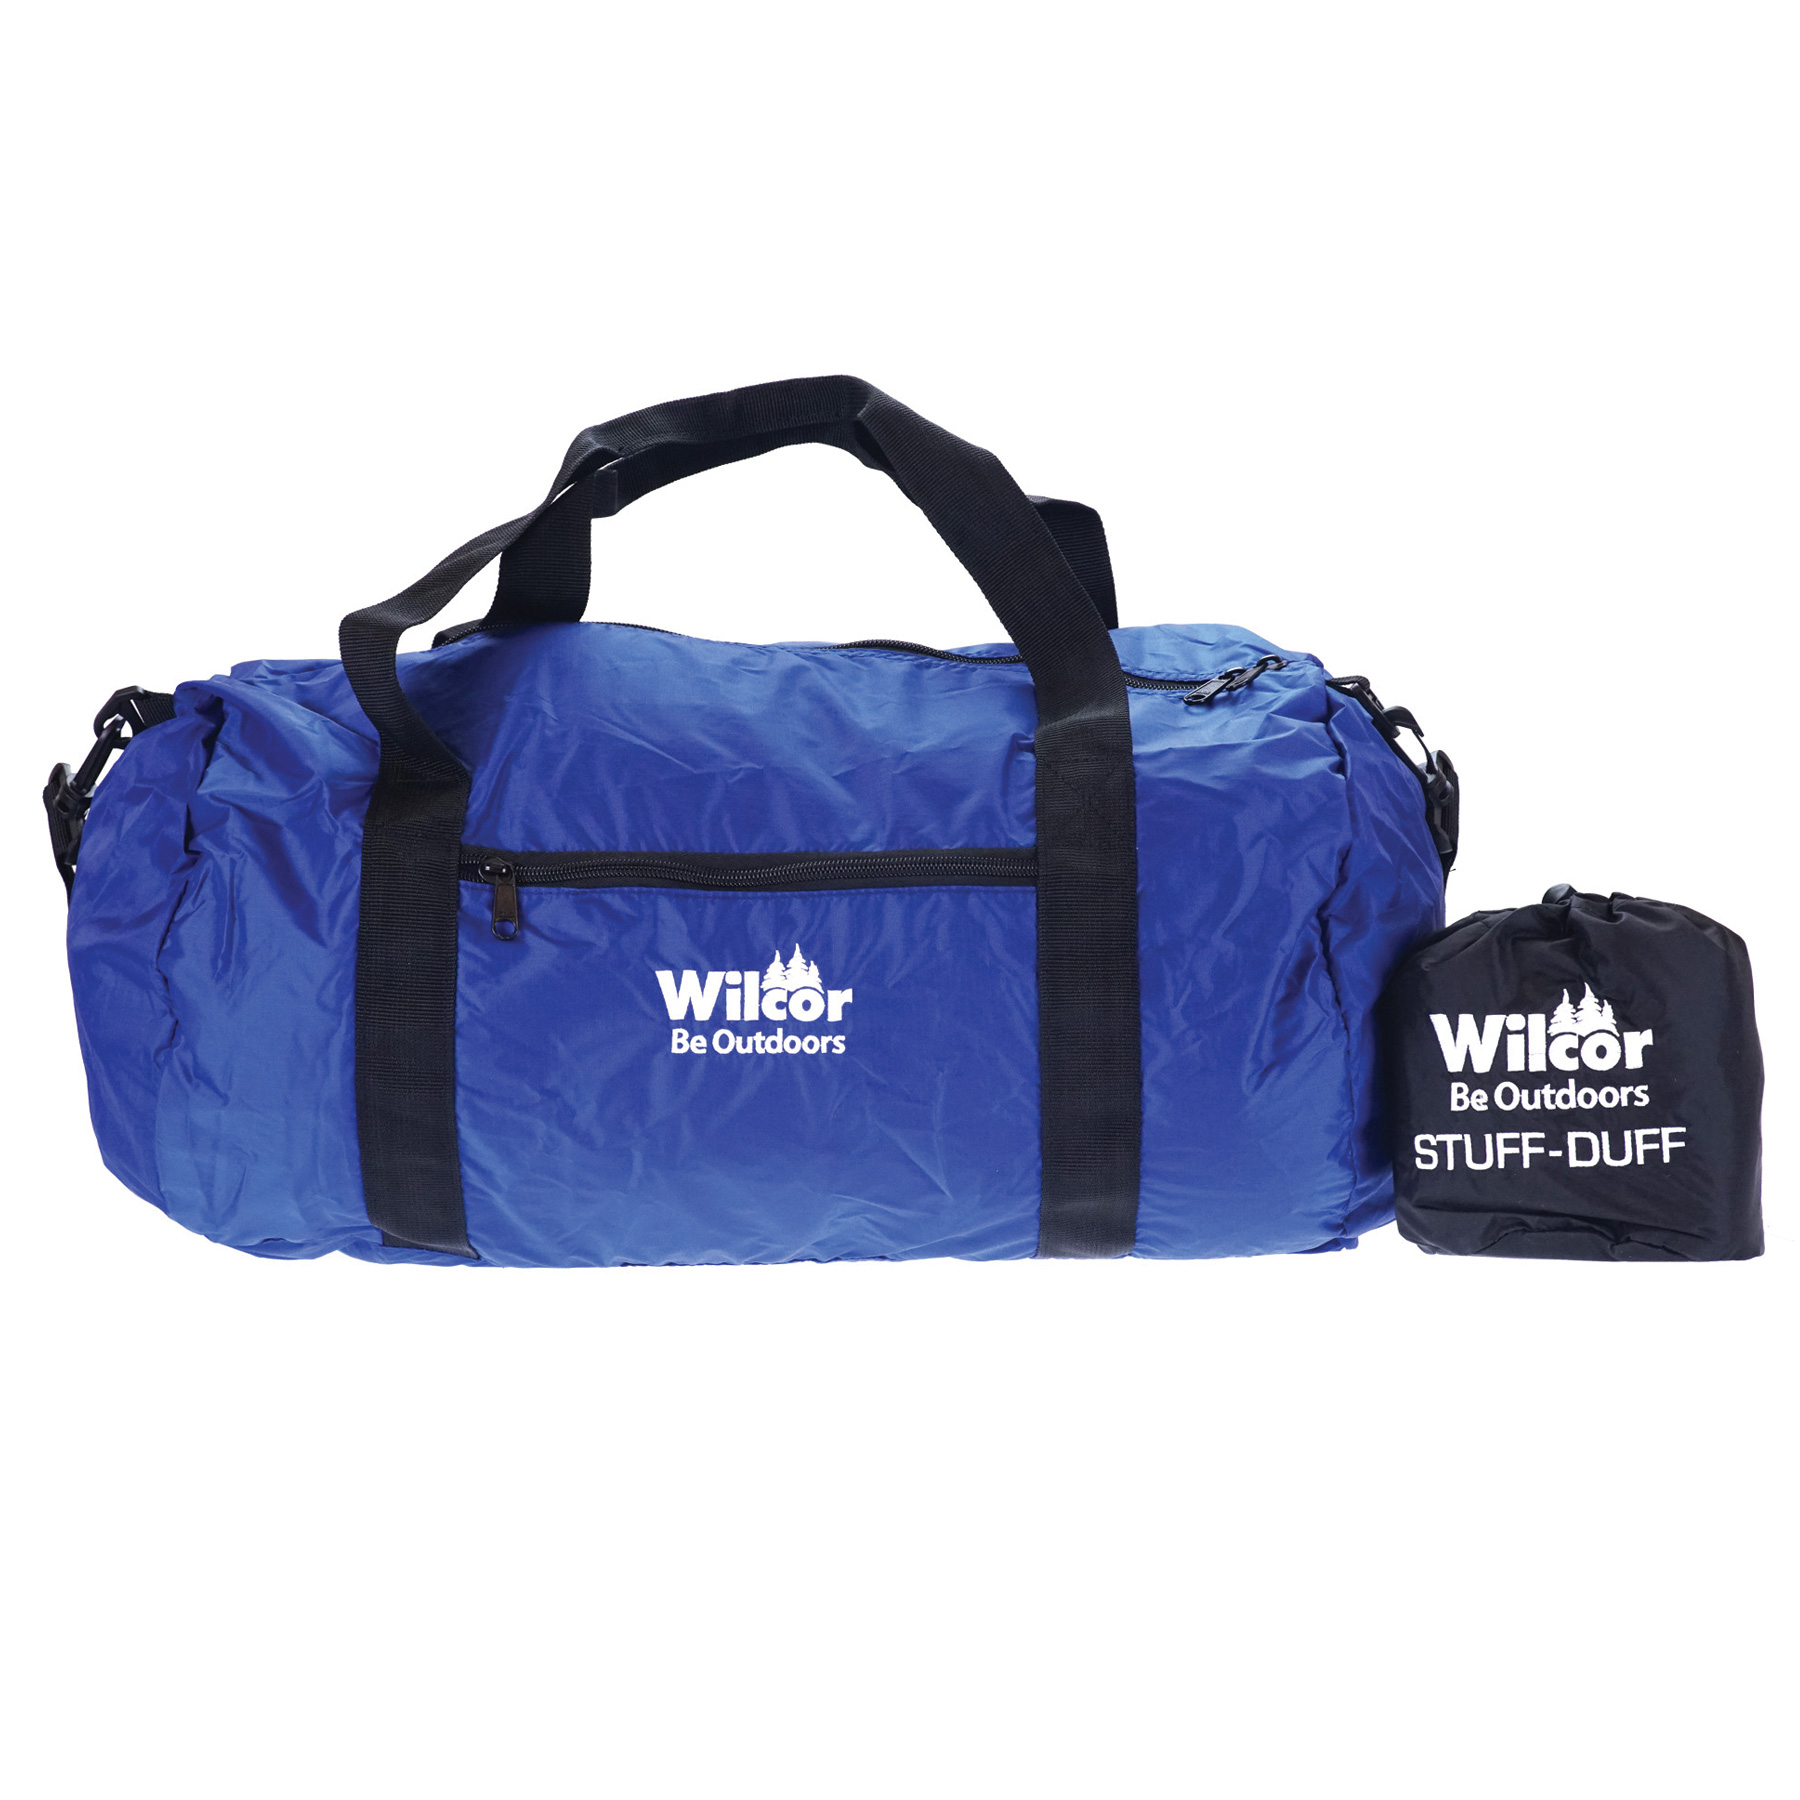 https://www.wilcor.net/productimages/cmp0373_duffle_pack_in_a_sack.jpg